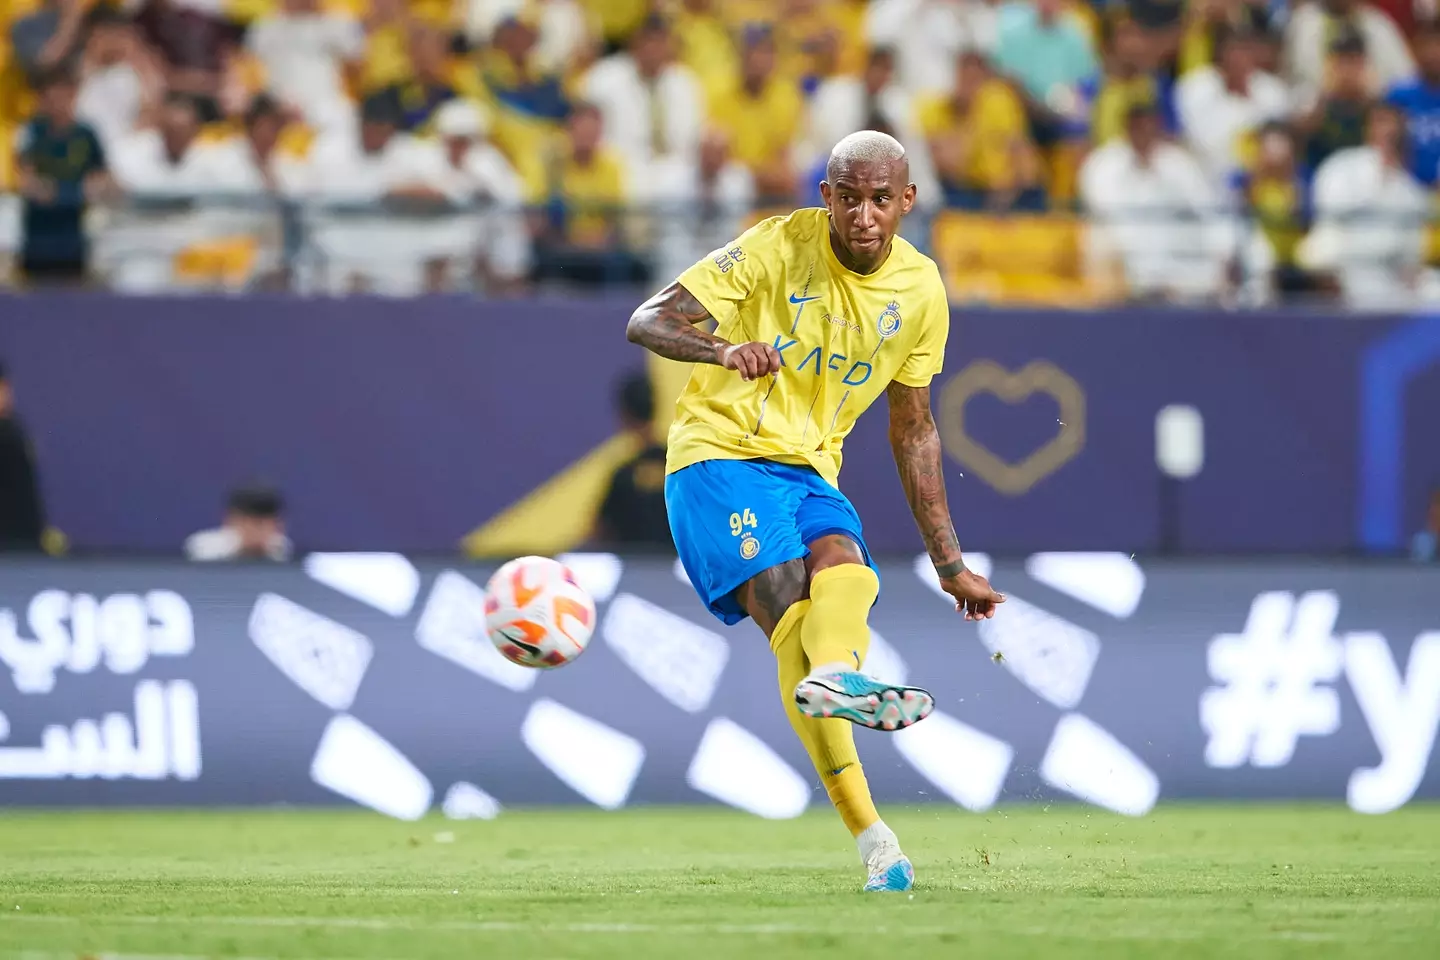 Talisca in action for Al Nassr. Image: Getty 